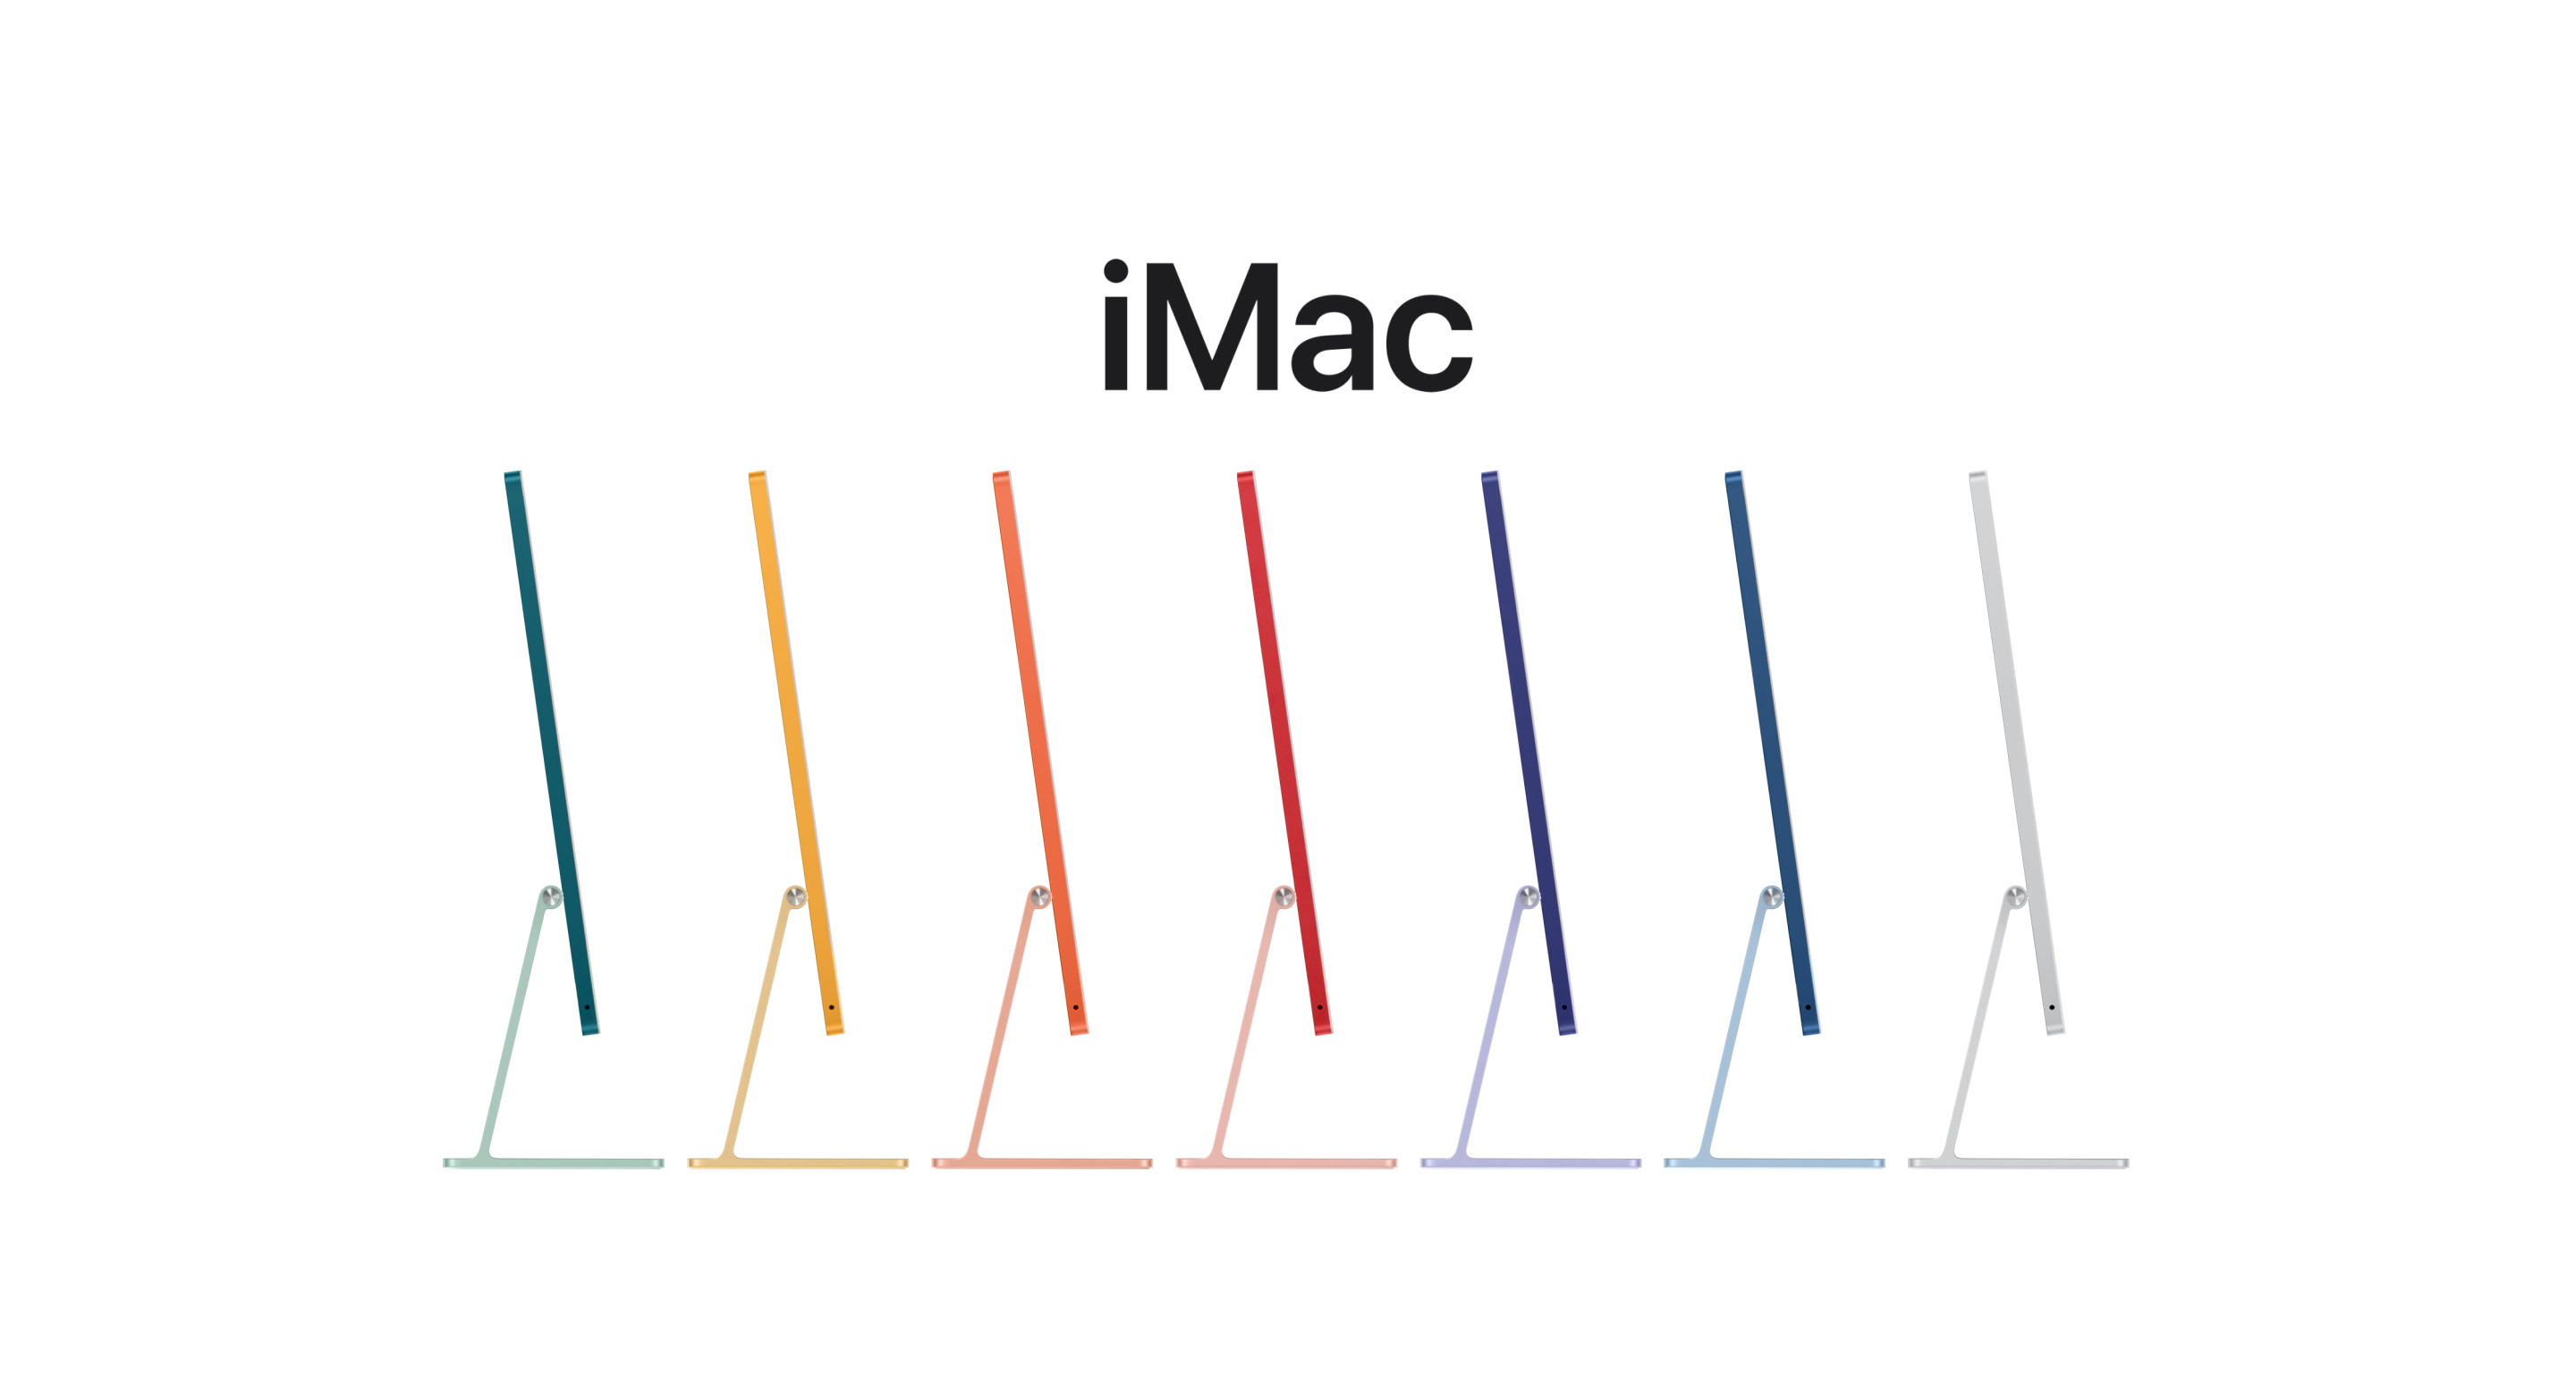 Animation of all seven colors of iMac